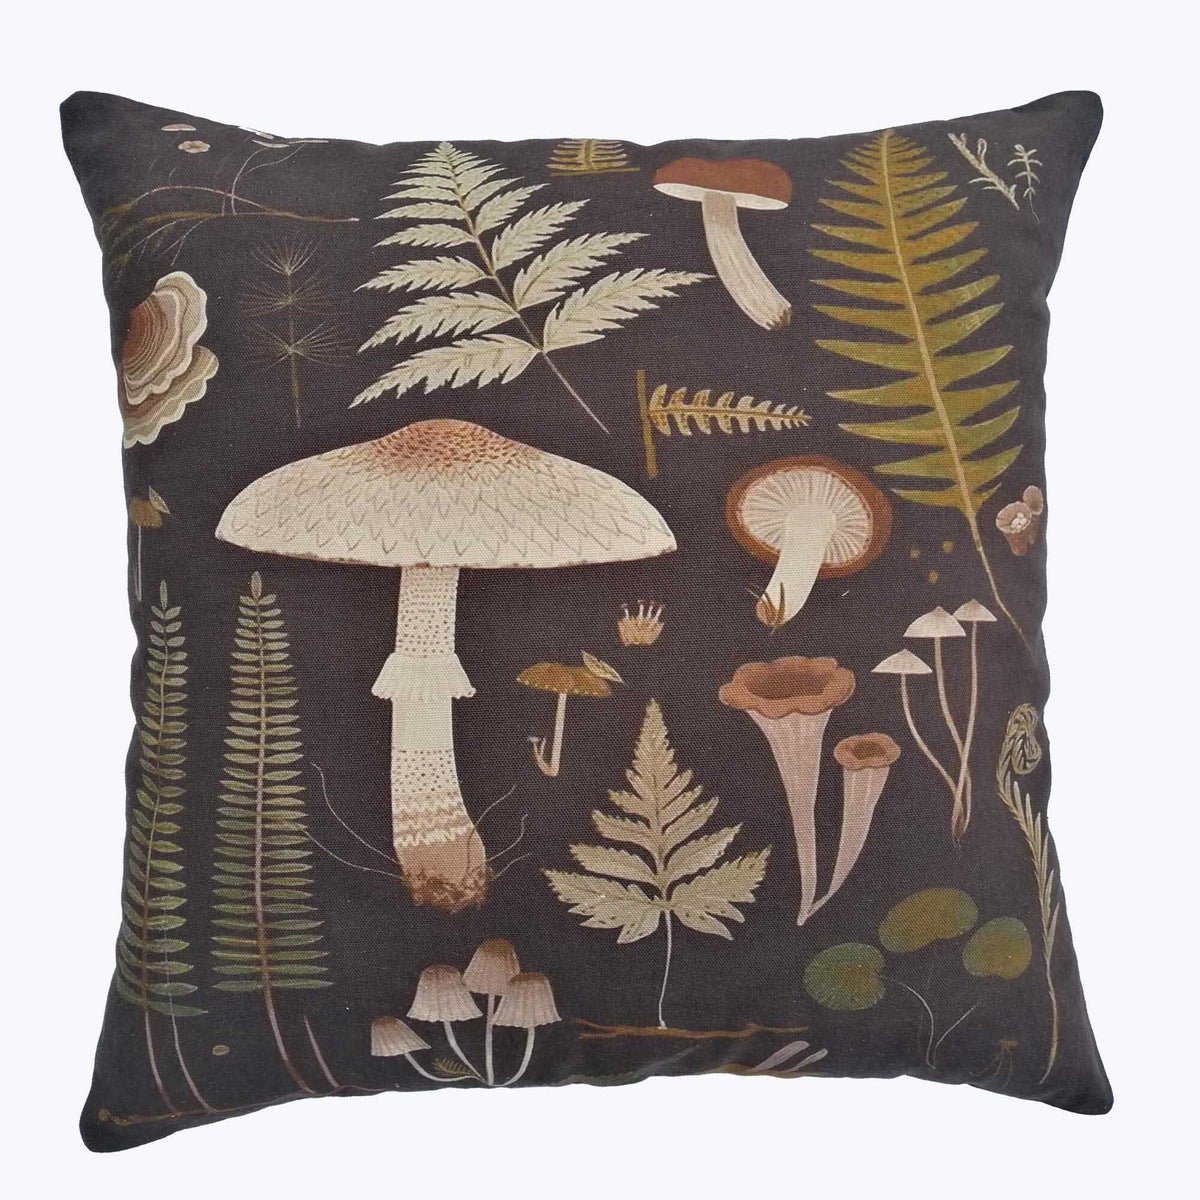 Cotton Square Pillow with Mushroom Pattern